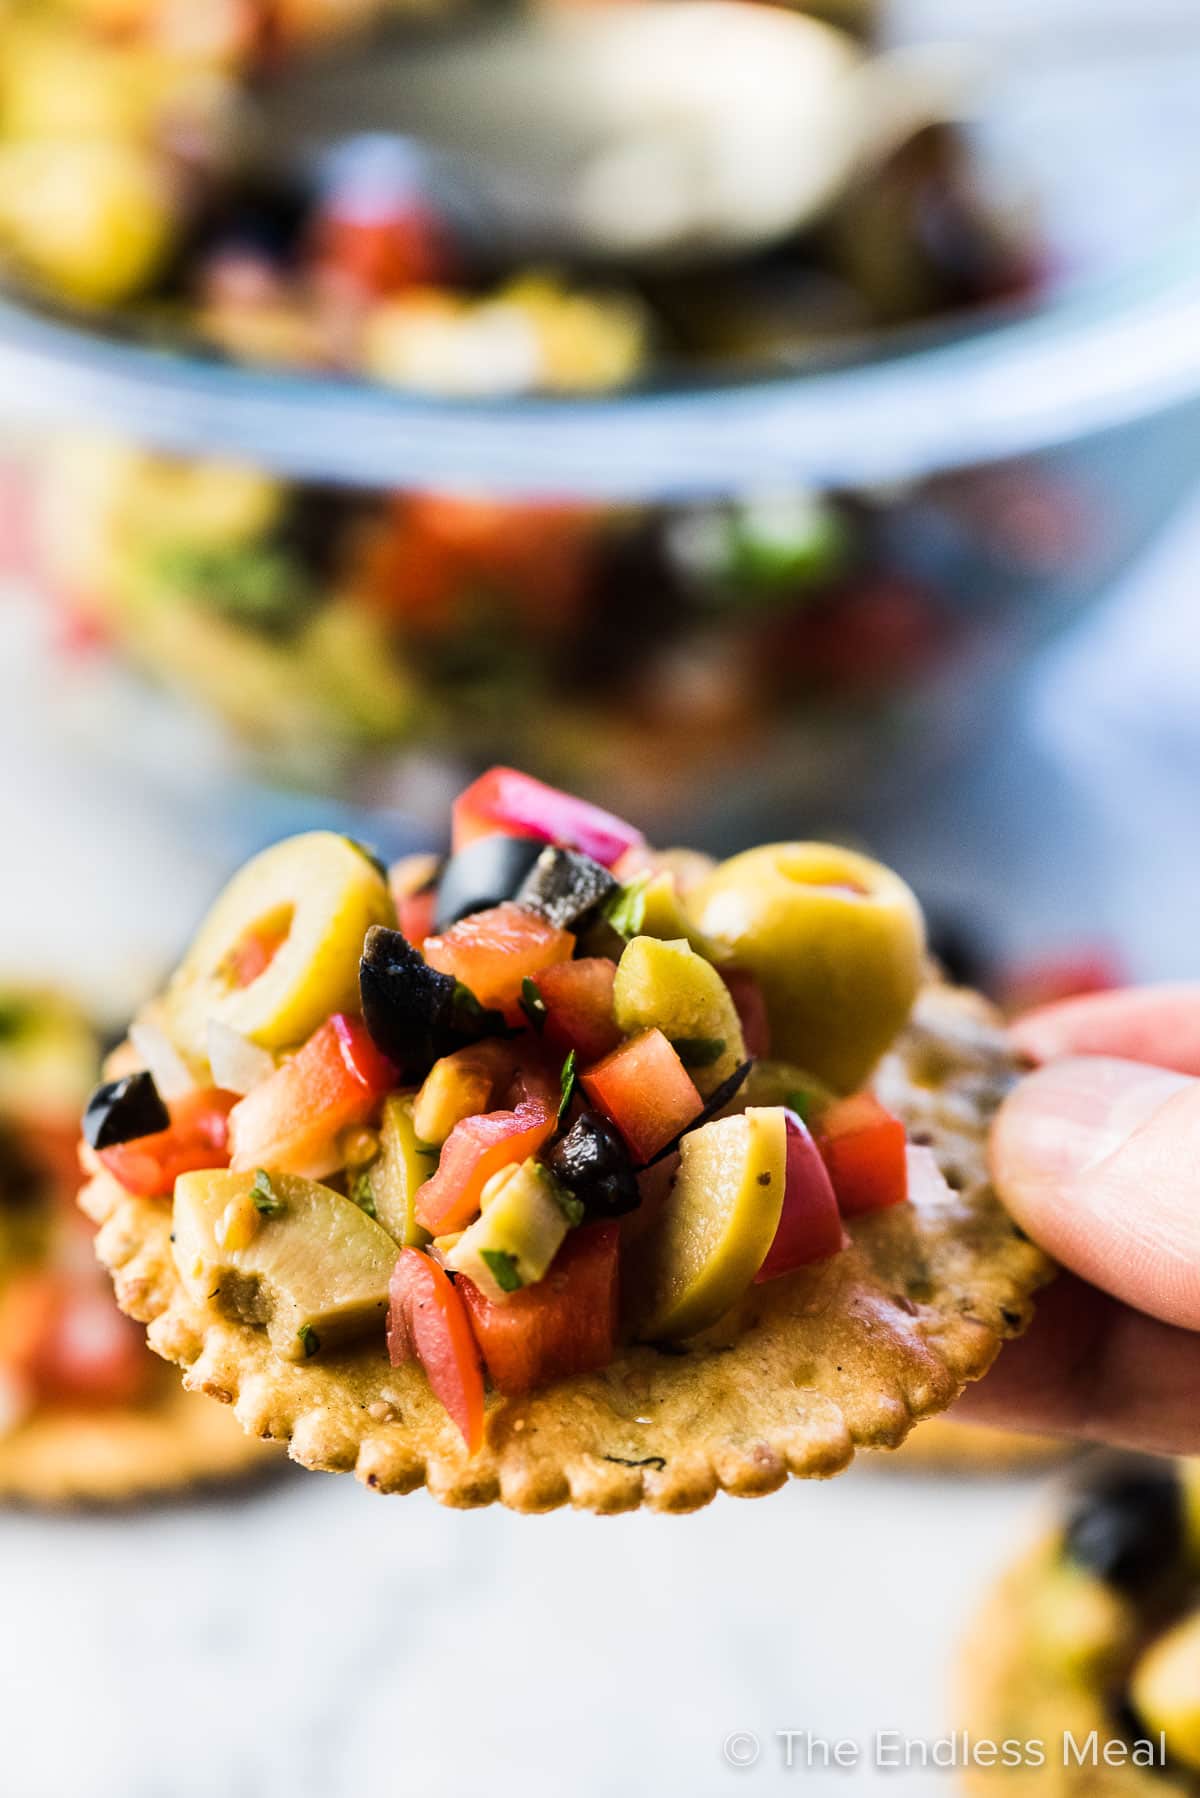 A hand holding a cracker piled with olive salsa.